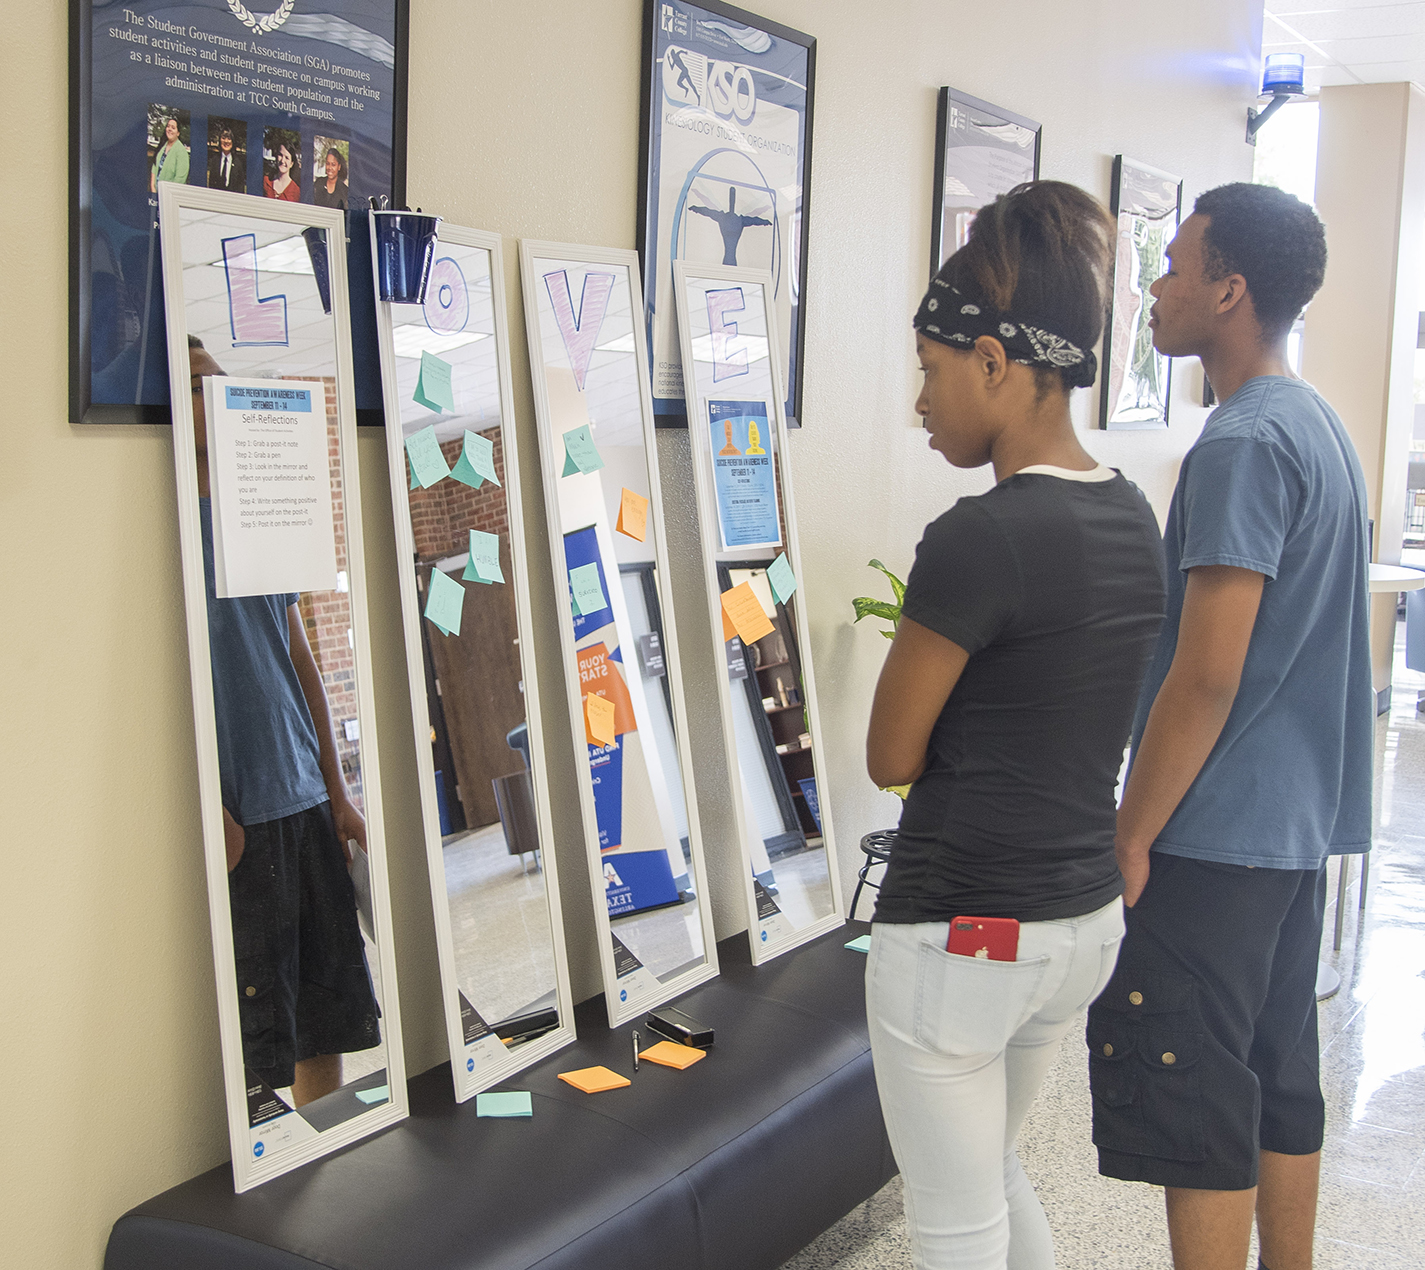 Keundrea Gunnell and Charles Mitchel look at the messages left by students on Sept. 11.